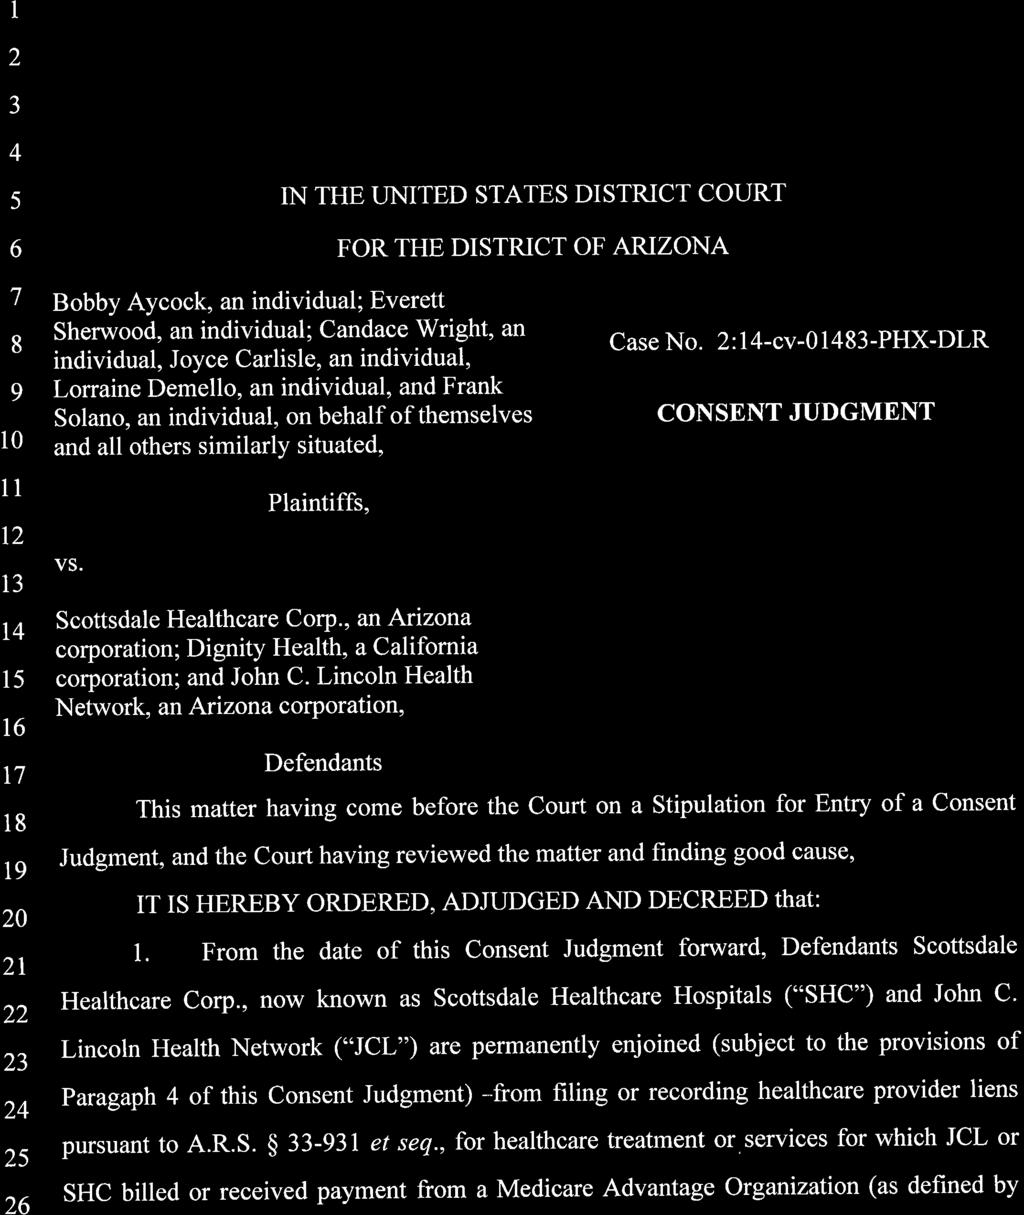 Case :1-cv-0-DLR Document 3 Filed /0/1 Page of 1 l t 1 t 1 t 0 l 3 N THE LTNTED STATES DSTRCT COURT FOR THE DSTRCT OF ARZONA Bobby Aycock, an individual; Everett Sherwood, an individual; Candace